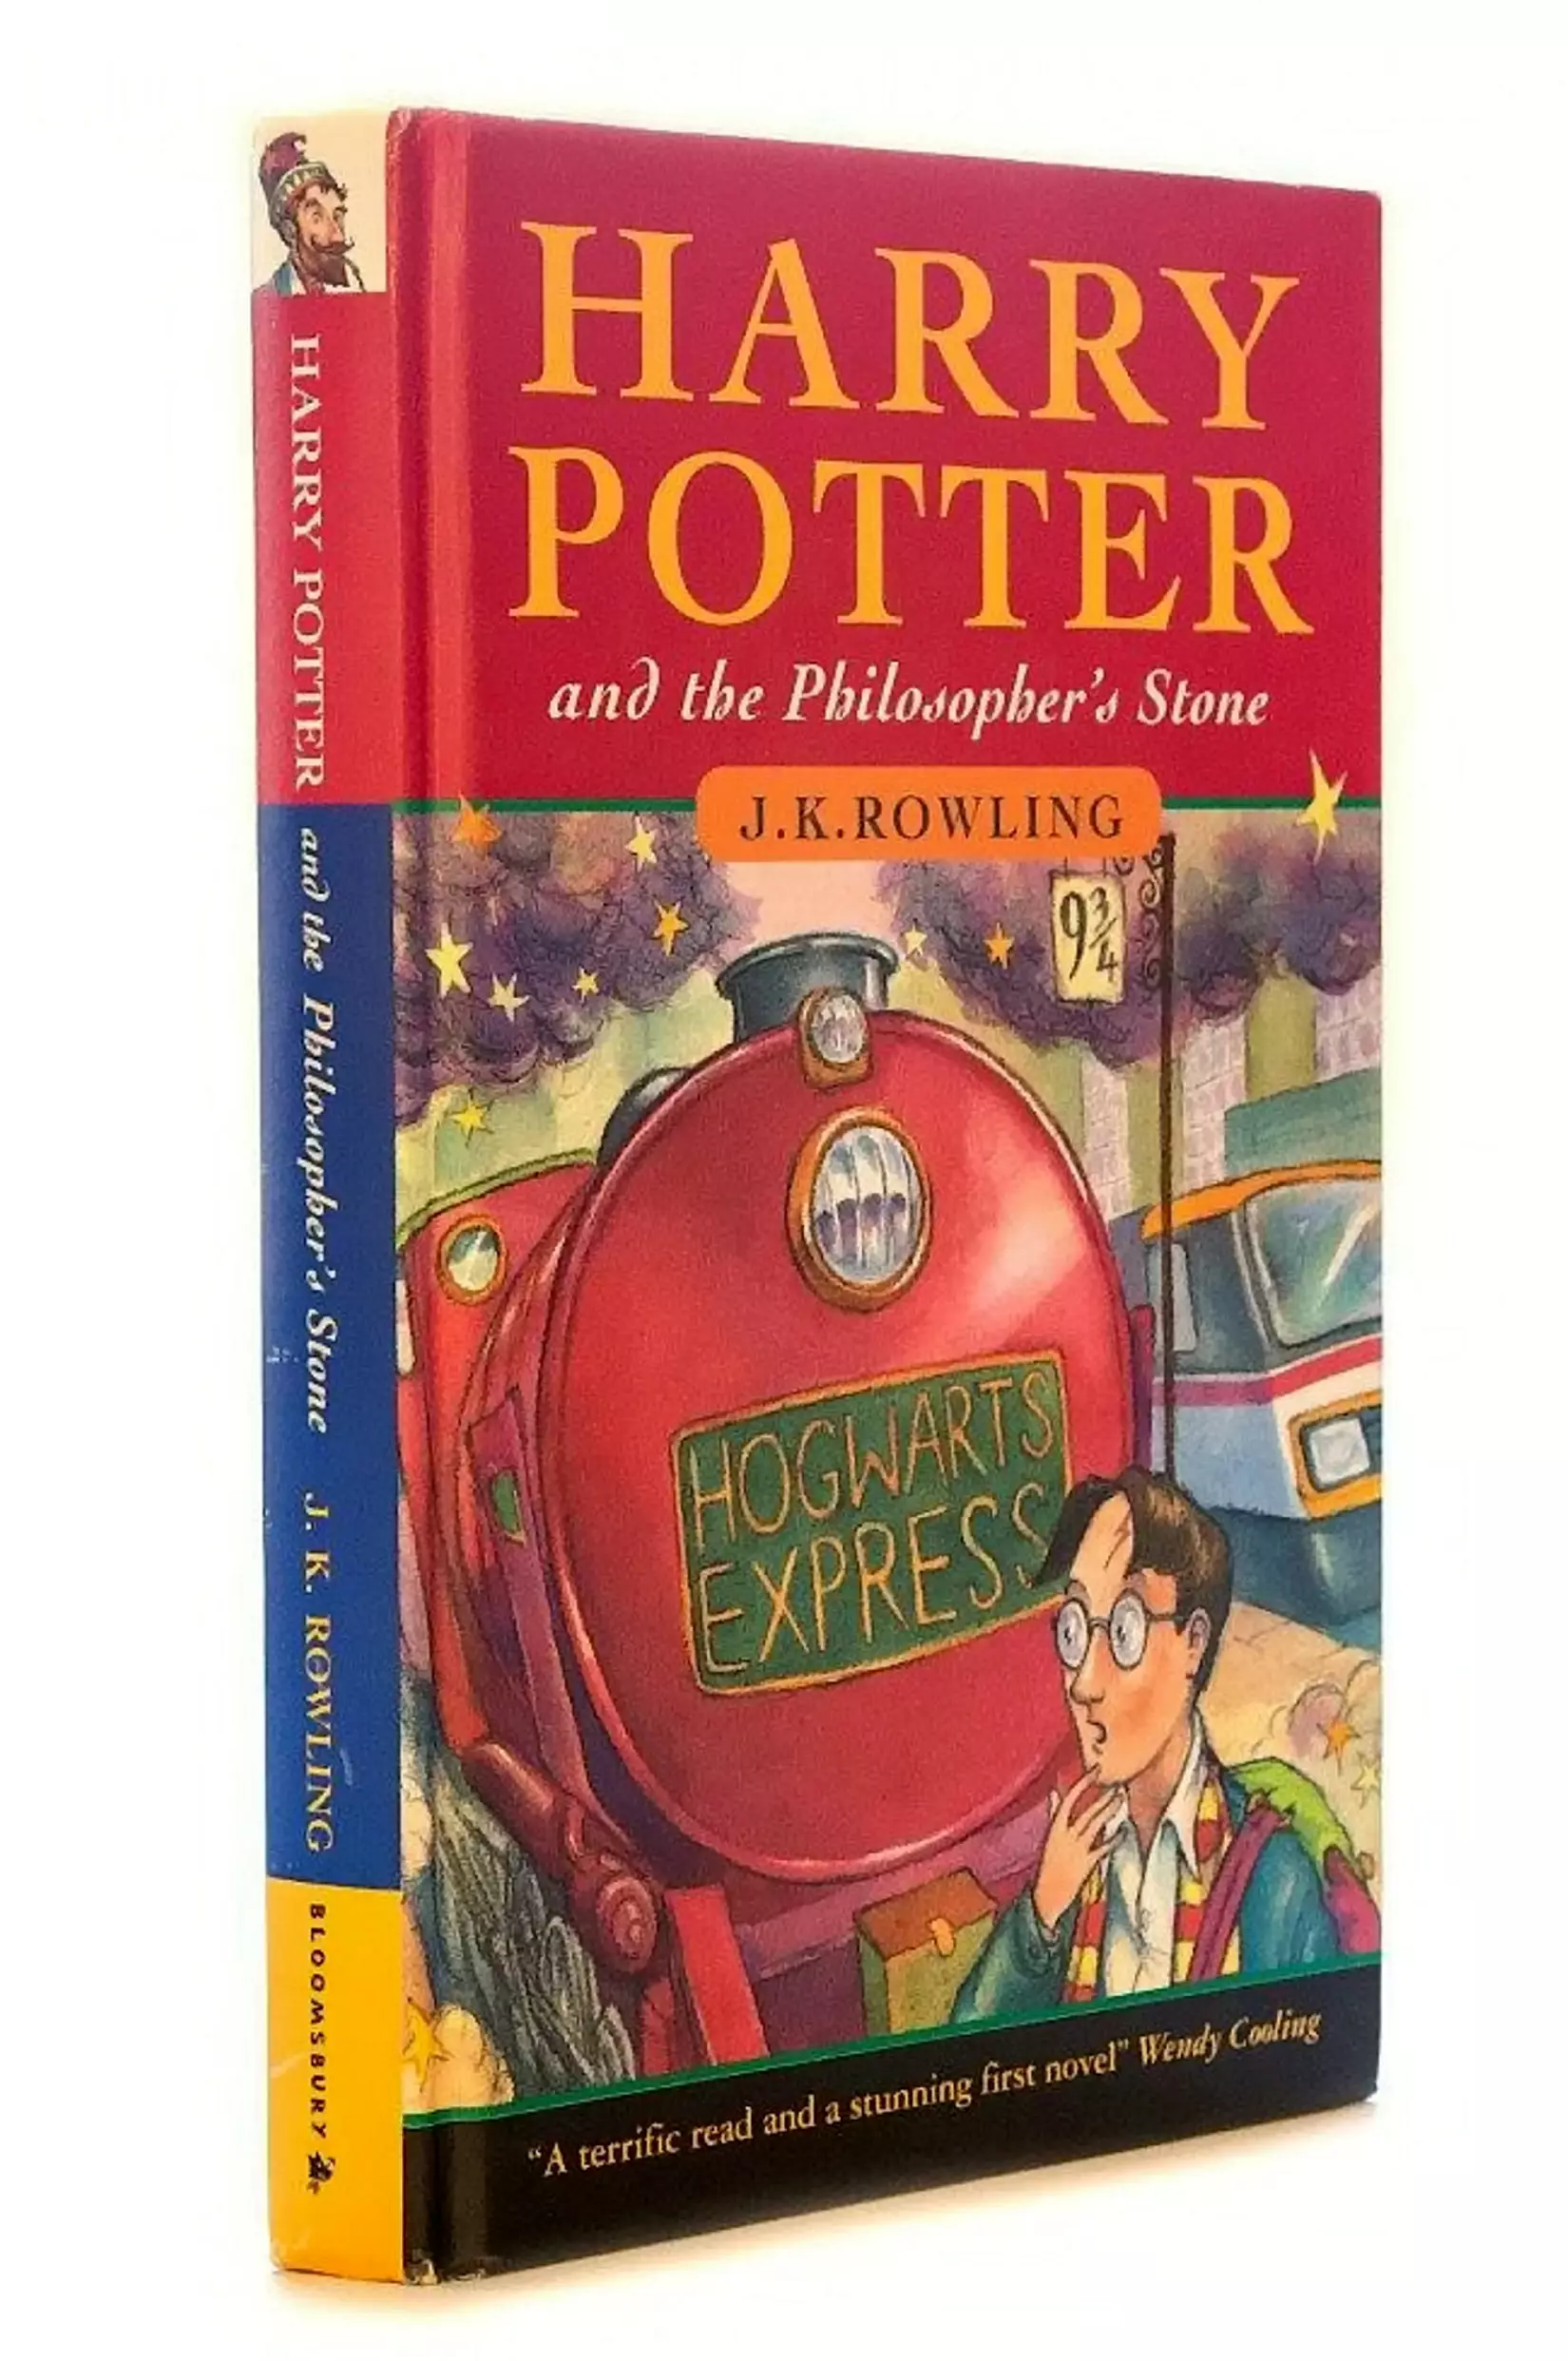 A rare Harry Potter book is expected to sell for £30k at auction